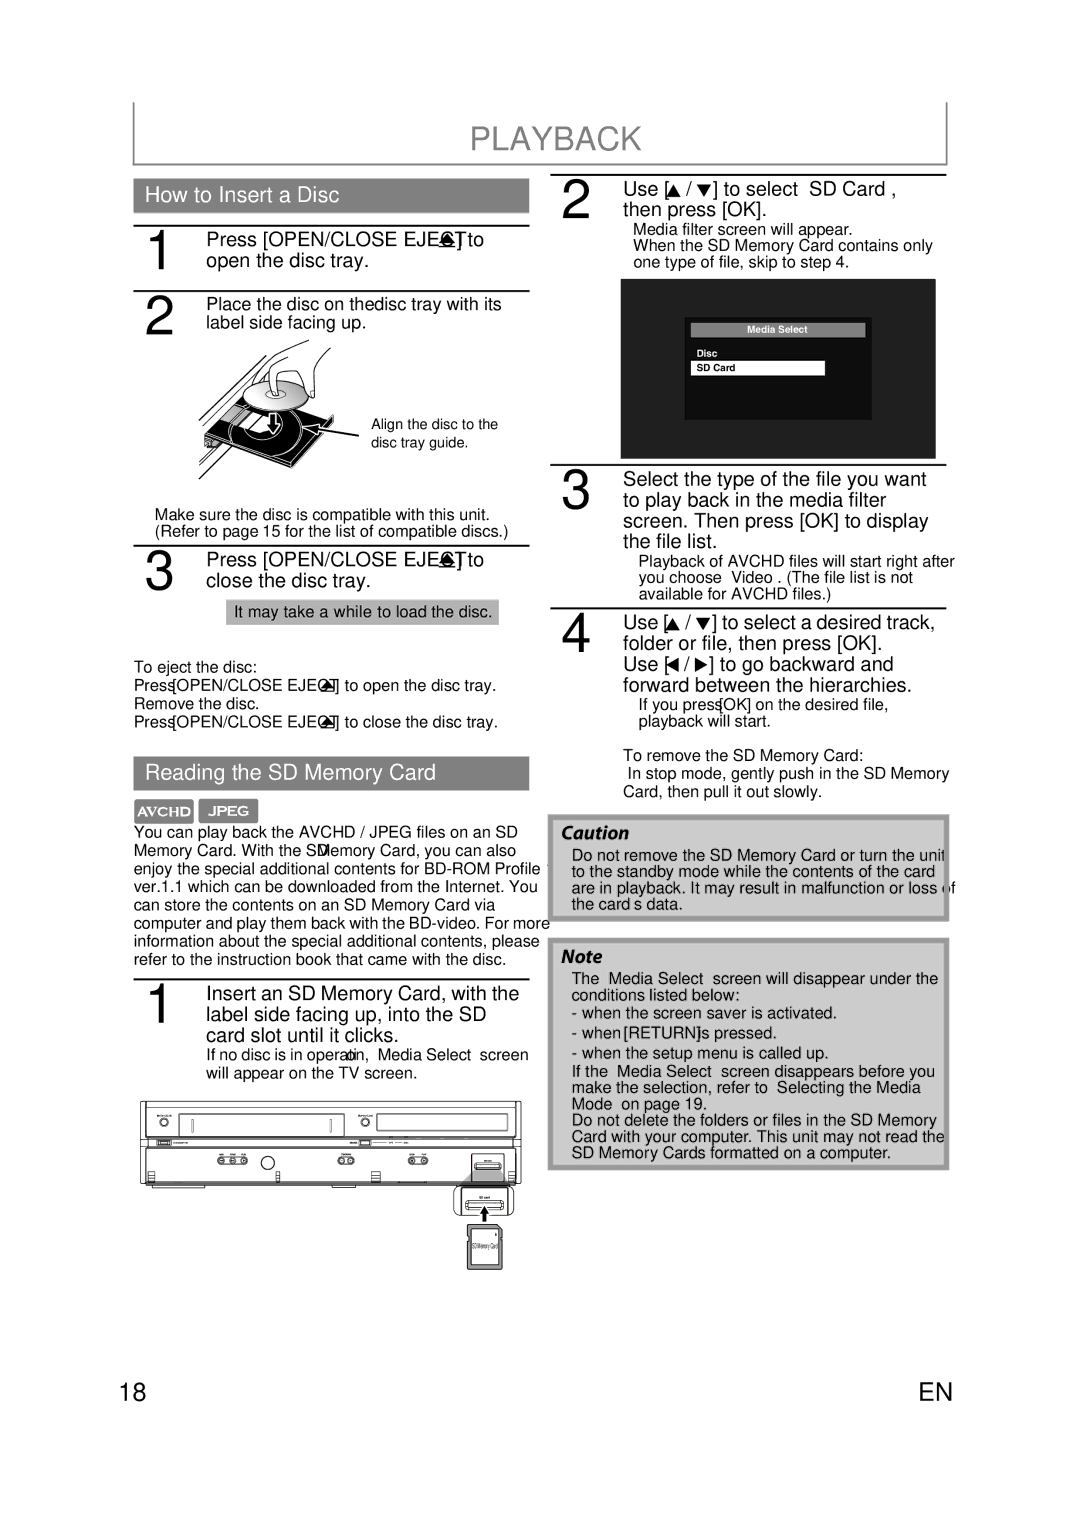 Magnavox MBP110V/F7 owner manual How to Insert a Disc, Reading the SD Memory Card 